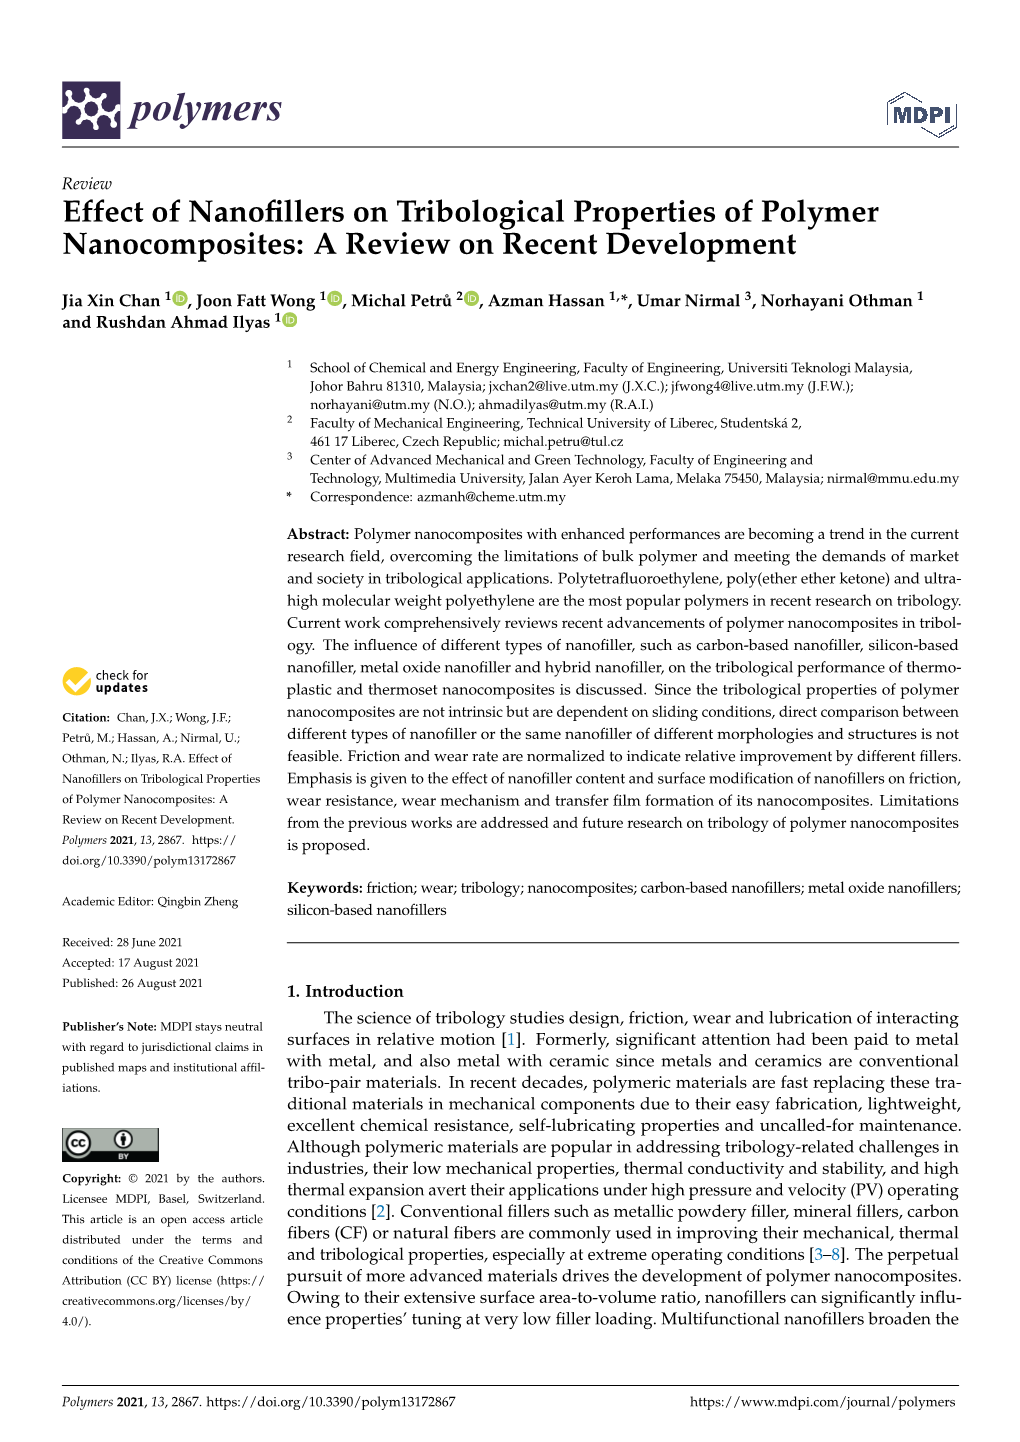 Effect of Nanofillers on Tribological Properties of Polymer Nanocomposites: a Review on Recent Development